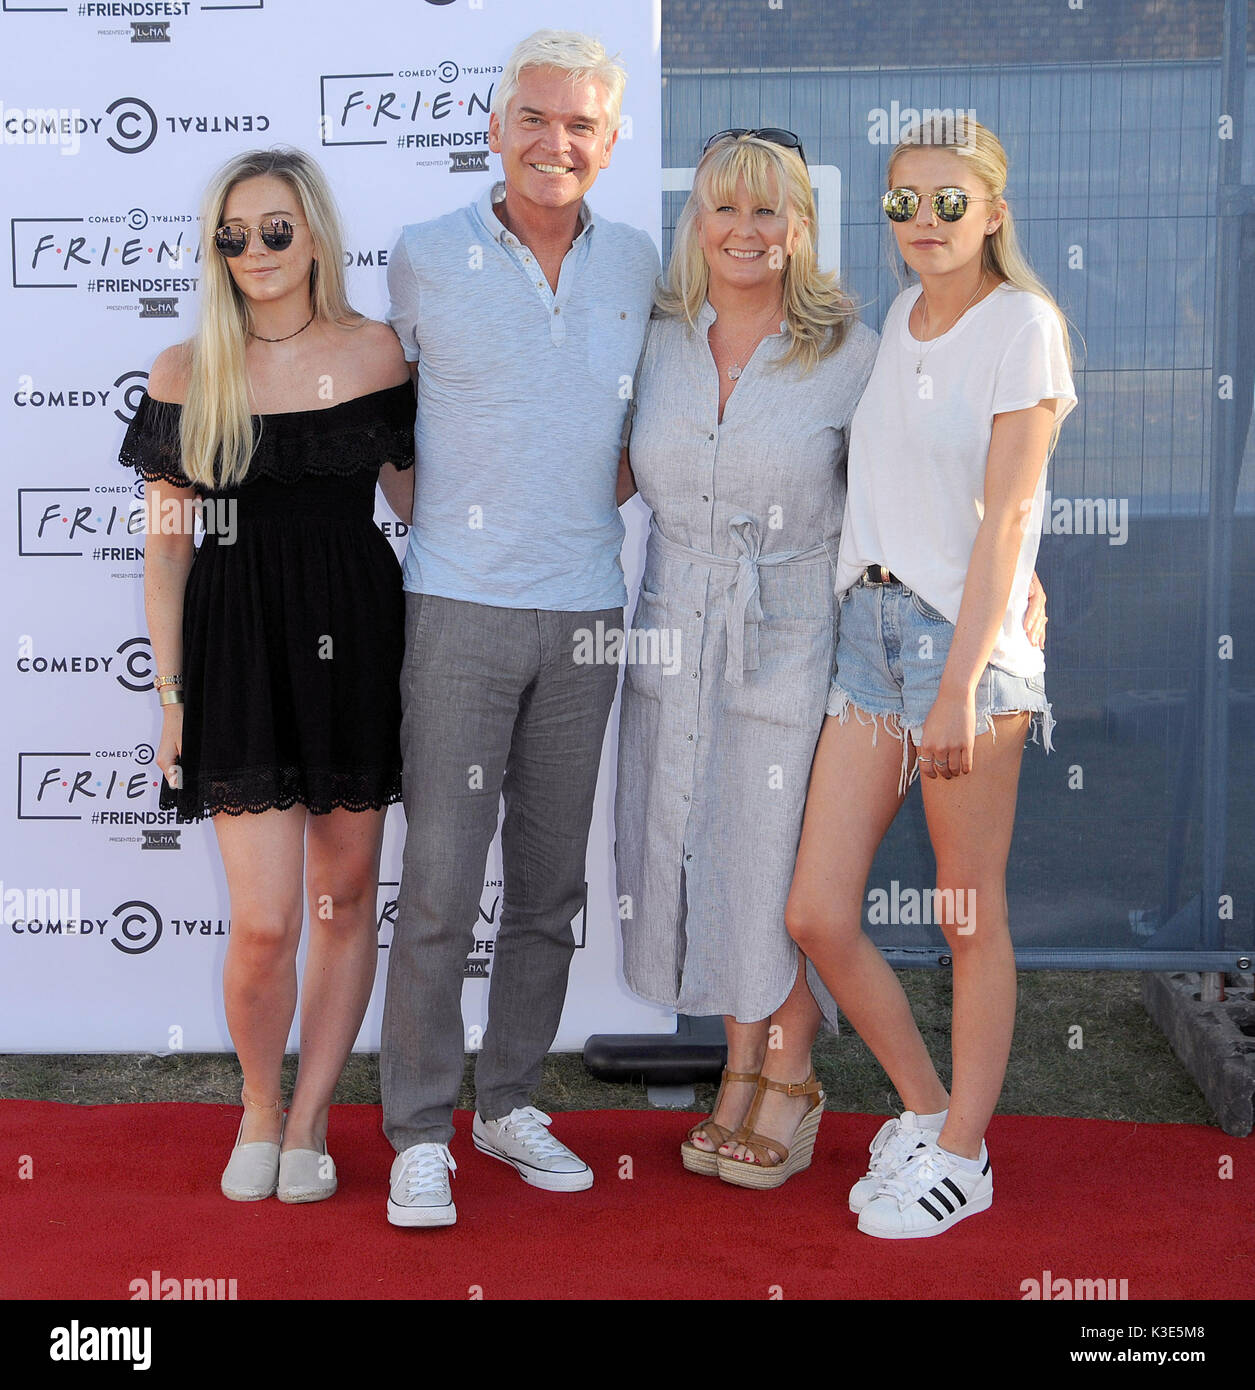 Photo Must Be Credited ©Alpha Press 078237 23/08/2016 Phillip Schofield and Wife Stephanie with daughters Molly Lowe and Ruby Lowe at the Comedy Central FriendsFest Launch Party in Haggerston Park, Hoxton, London. Stock Photo